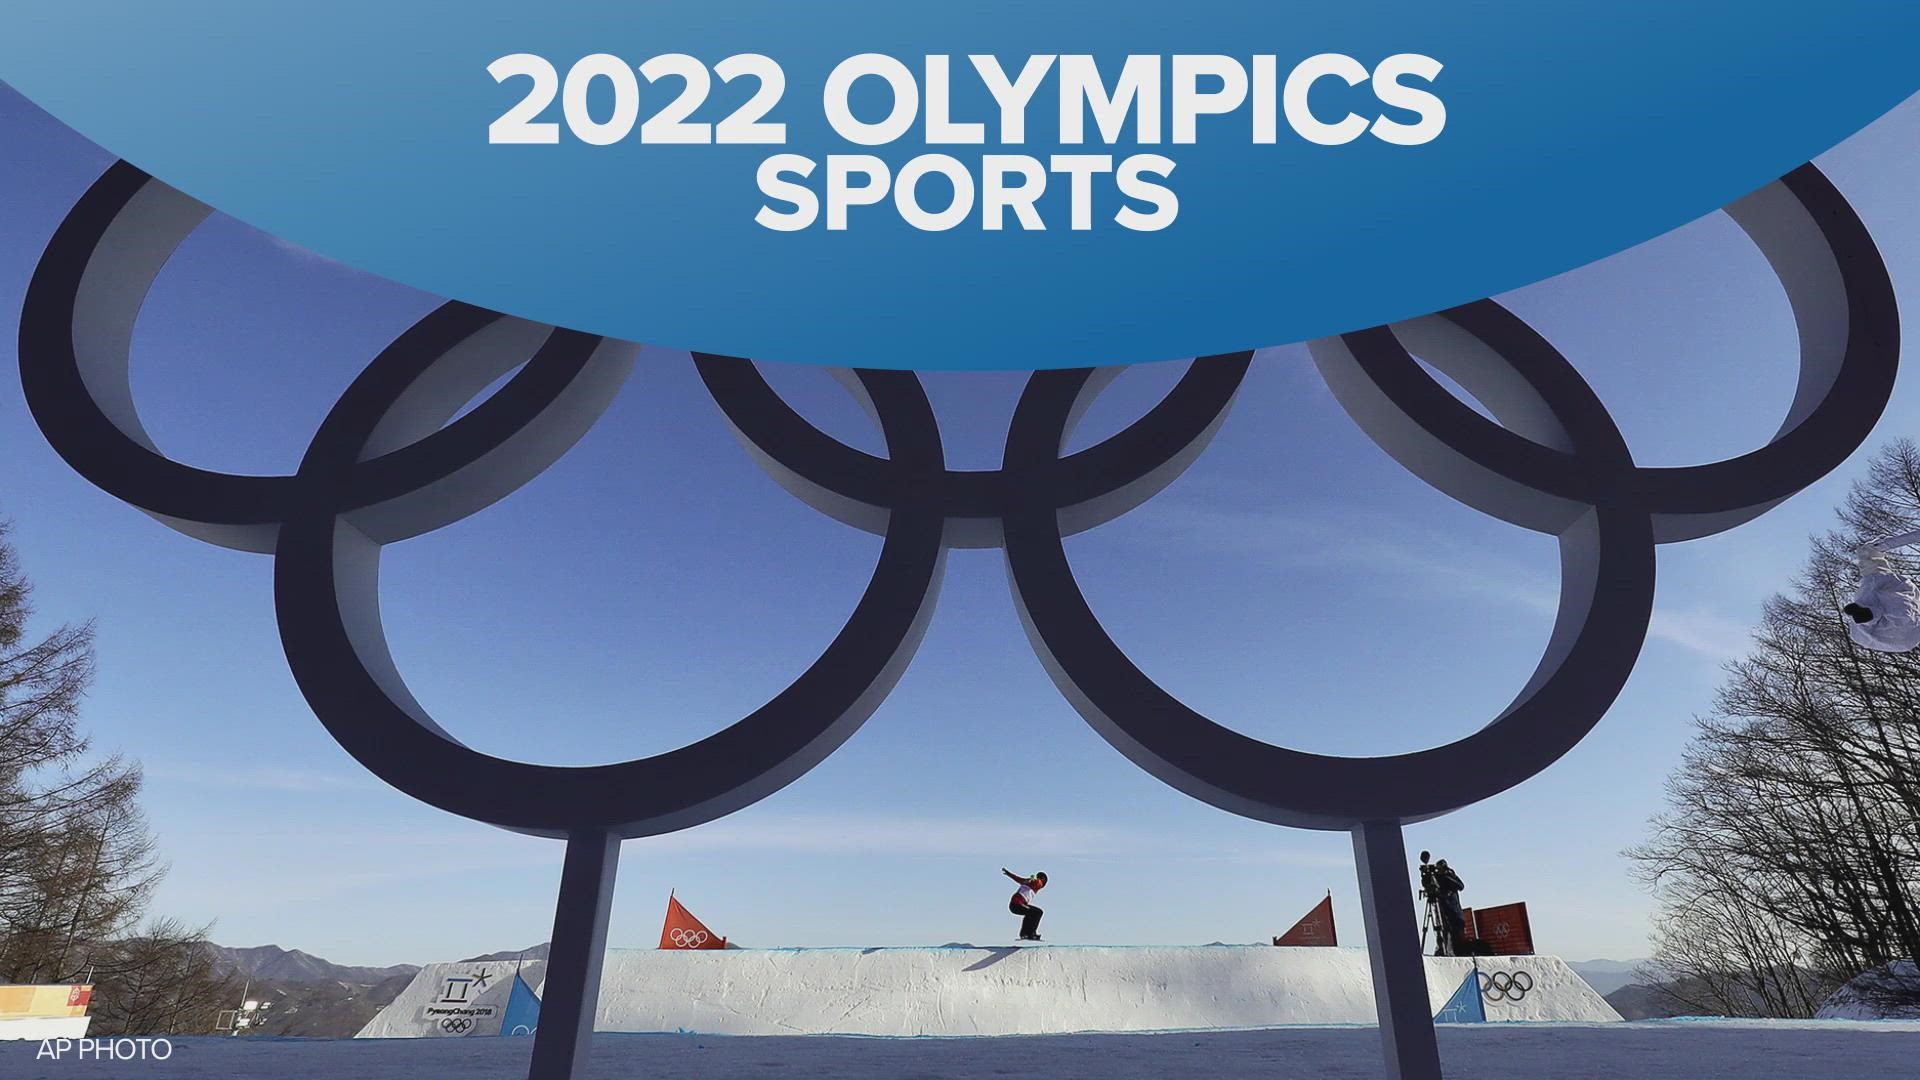 These are the sports that will be competed at the 2022 Winter Olympics in Beijing, China.